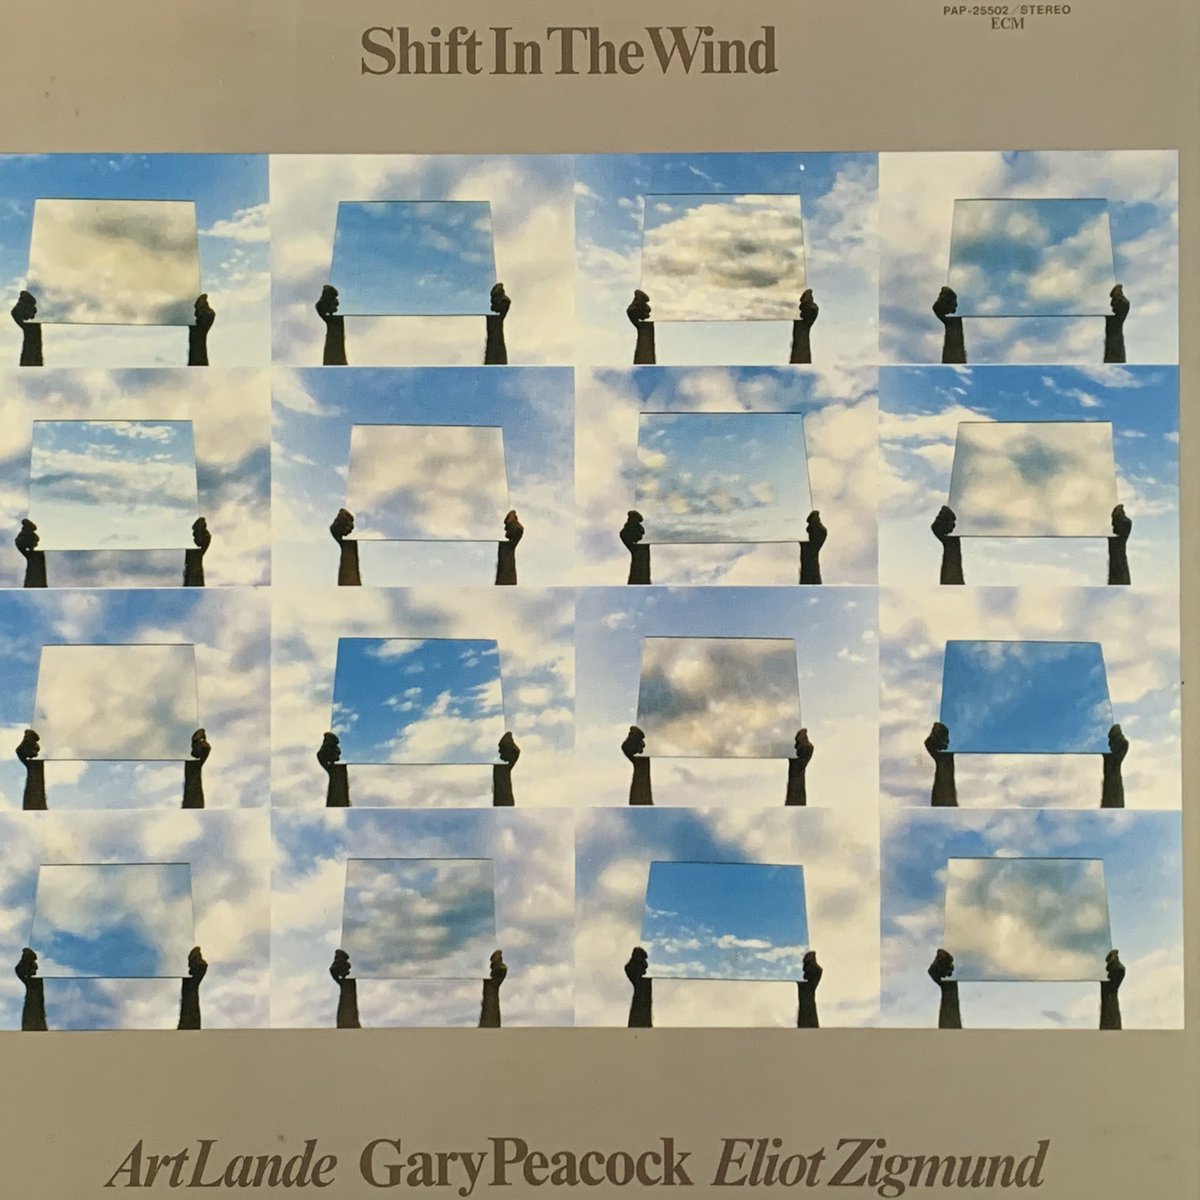 Shift In The Wind
Gary Peacock 
Recorded February 1980 https://t.co/NypW9Q2YrE